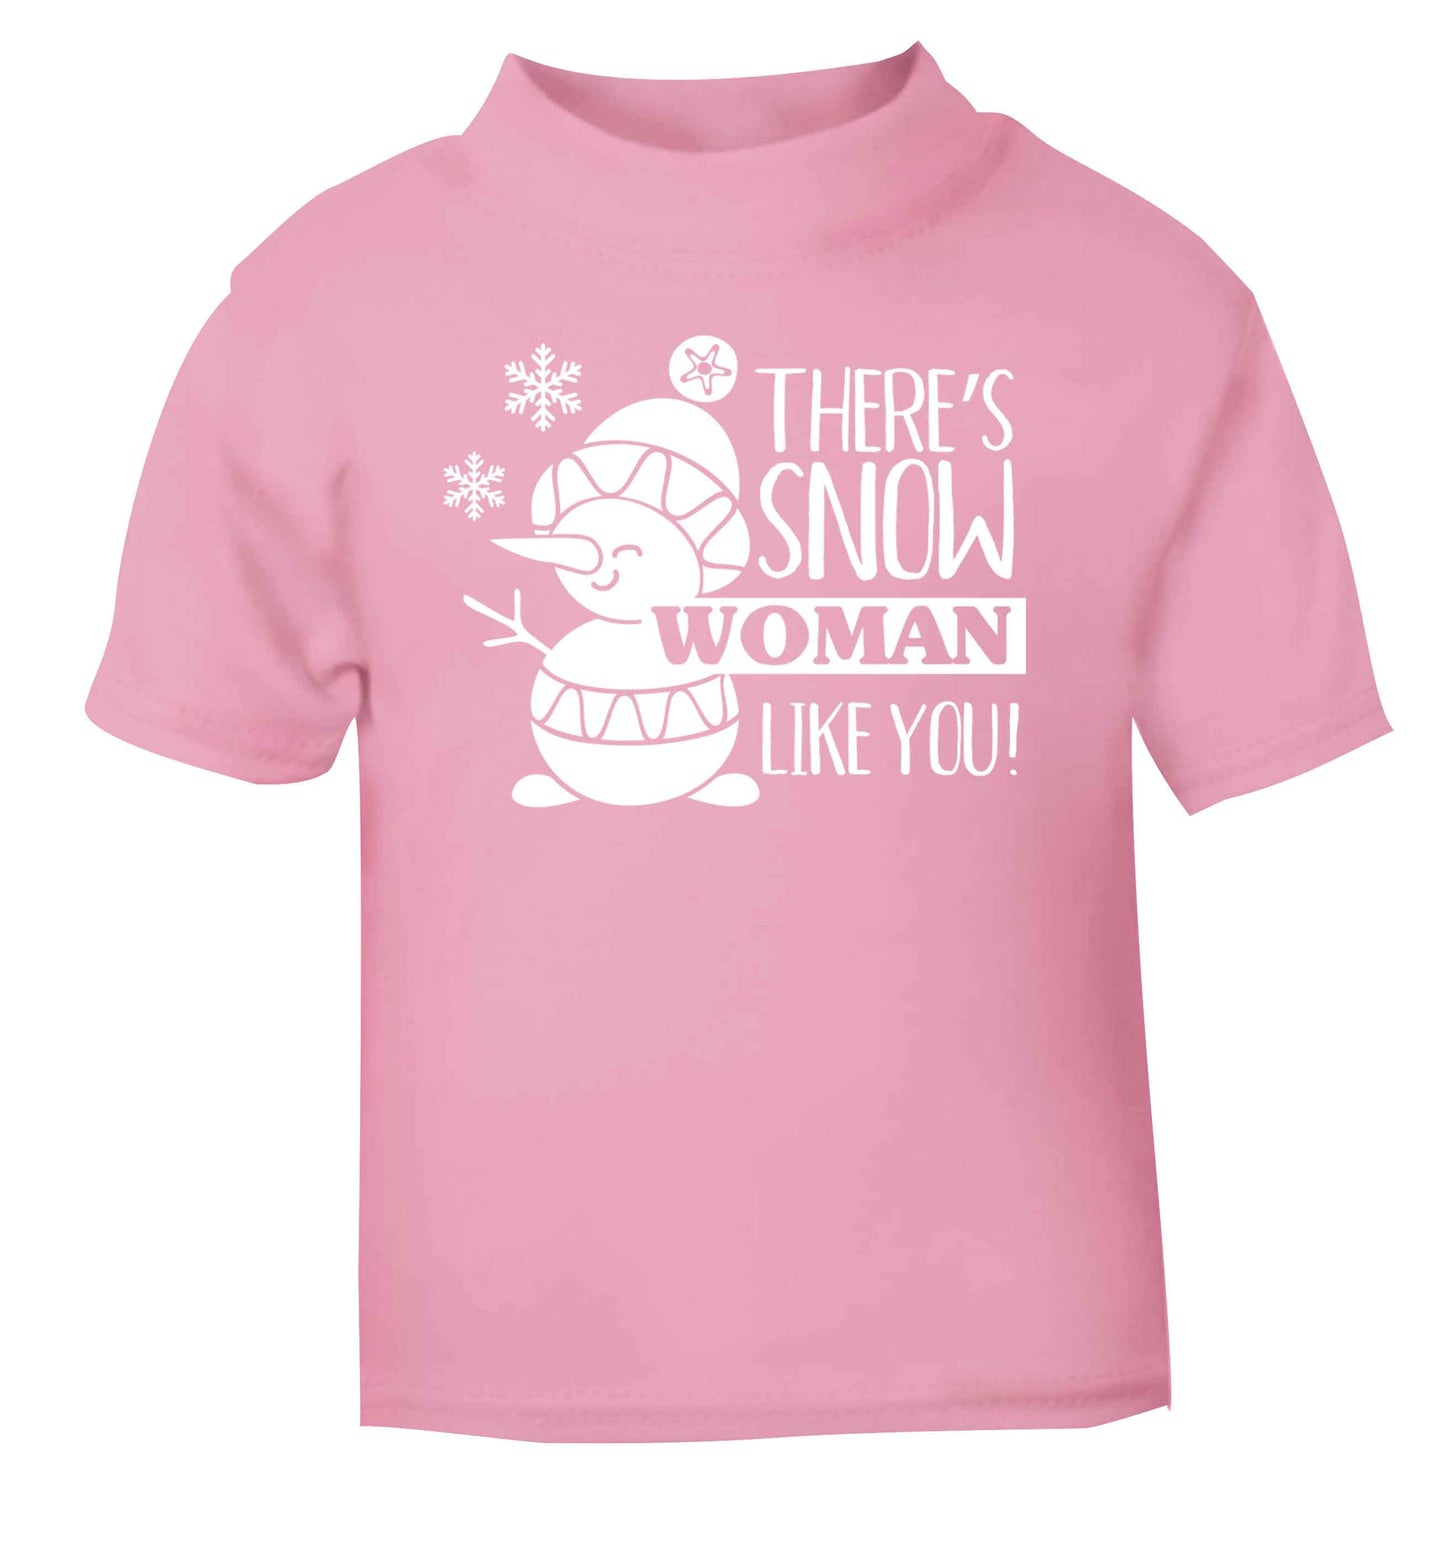 There's snow woman like you light pink baby toddler Tshirt 2 Years